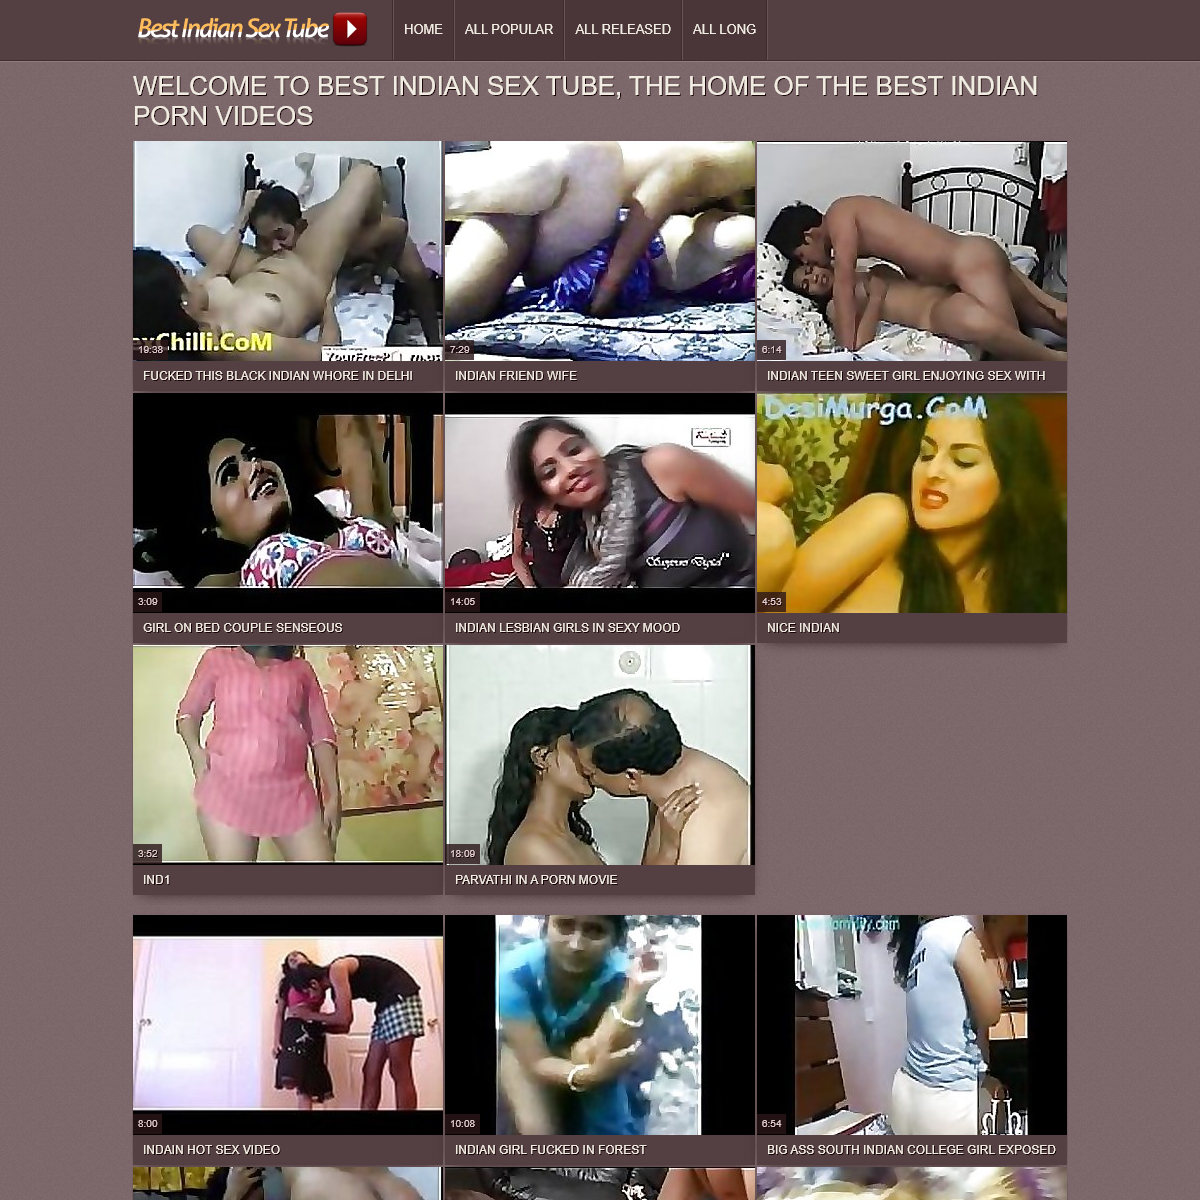 A complete backup of www.bestindiansextube.com